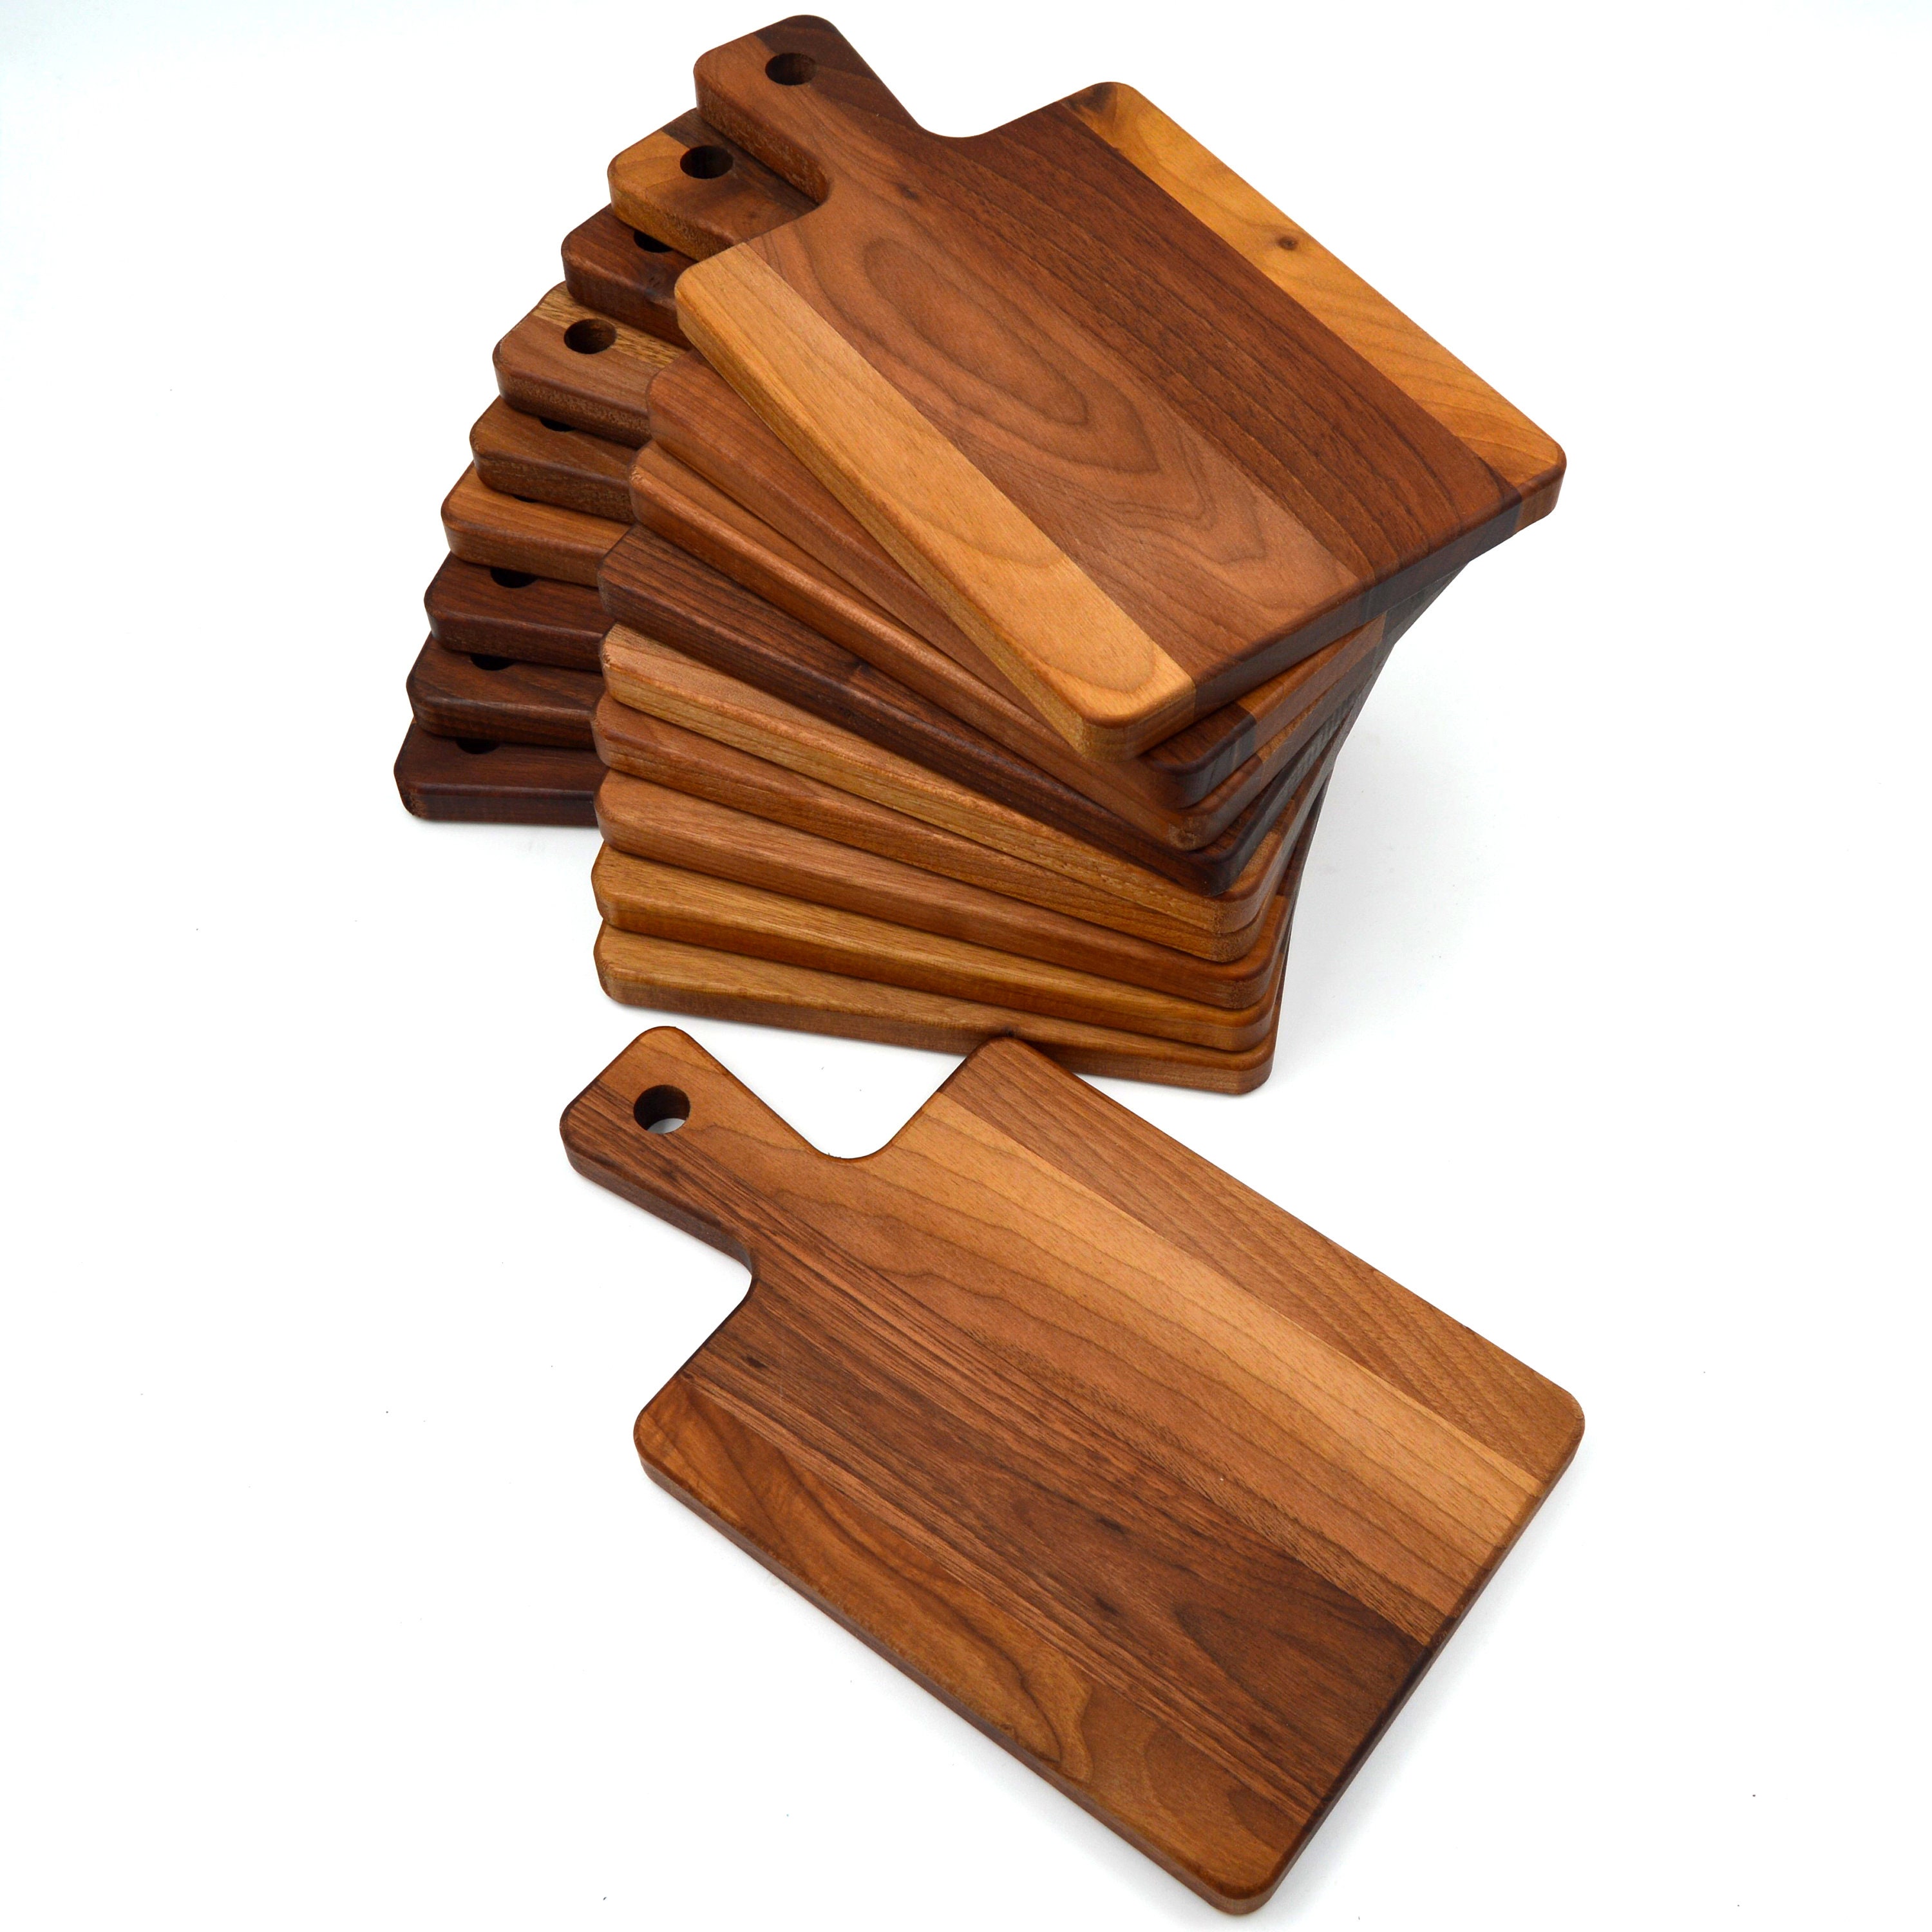 Wholesale Cutting Boards Round Wooden Board for Logo Laser Engraving,  Promotional Gifts, Promotional Items, Branding 